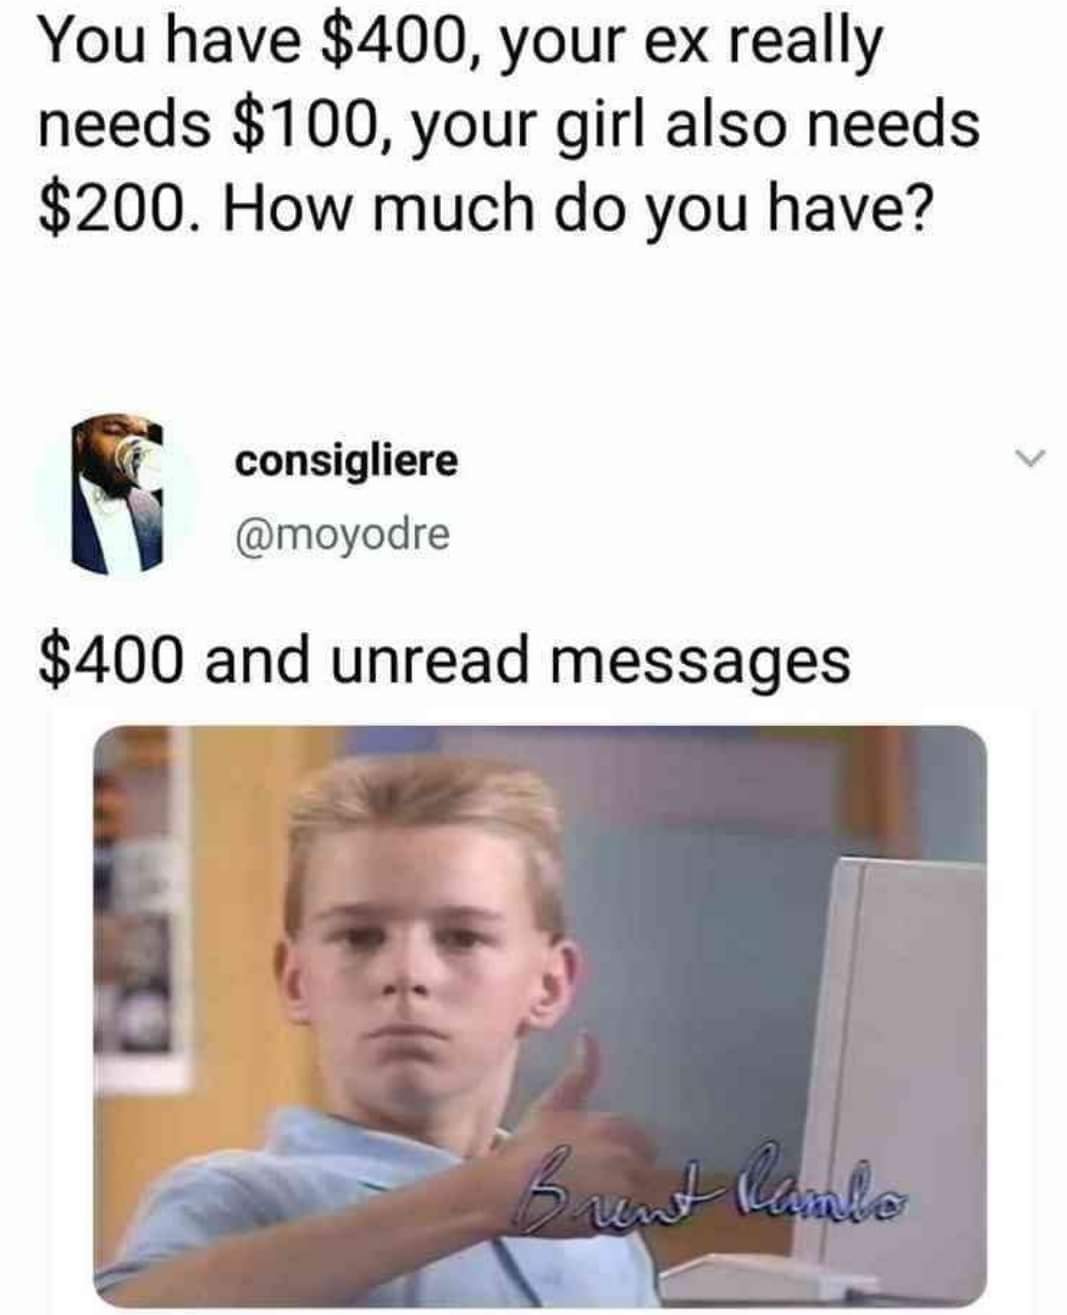 Meme - You have $400, your ex really needs $100, your girl also needs $200. How much do you have? consigliere $400 and unread messages Sunt Kimle